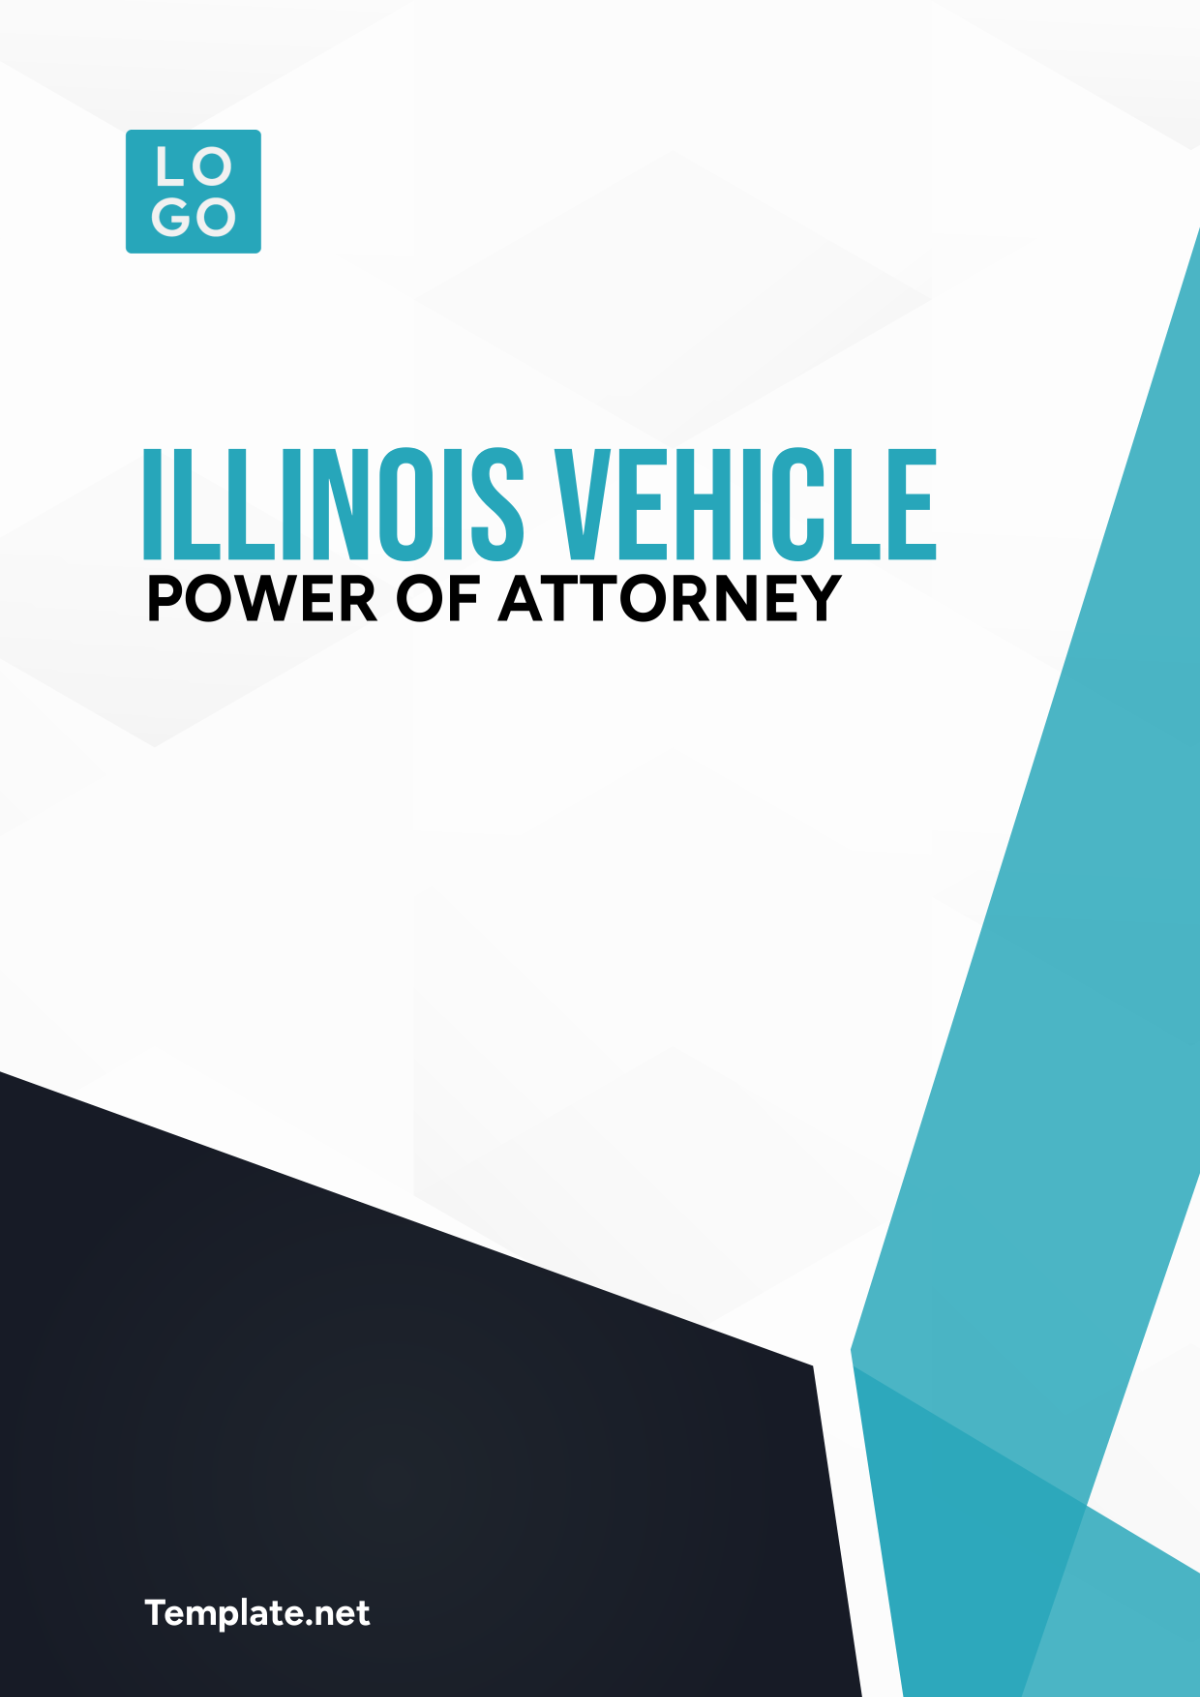 Illinois Vehicle Power of Attorney Template